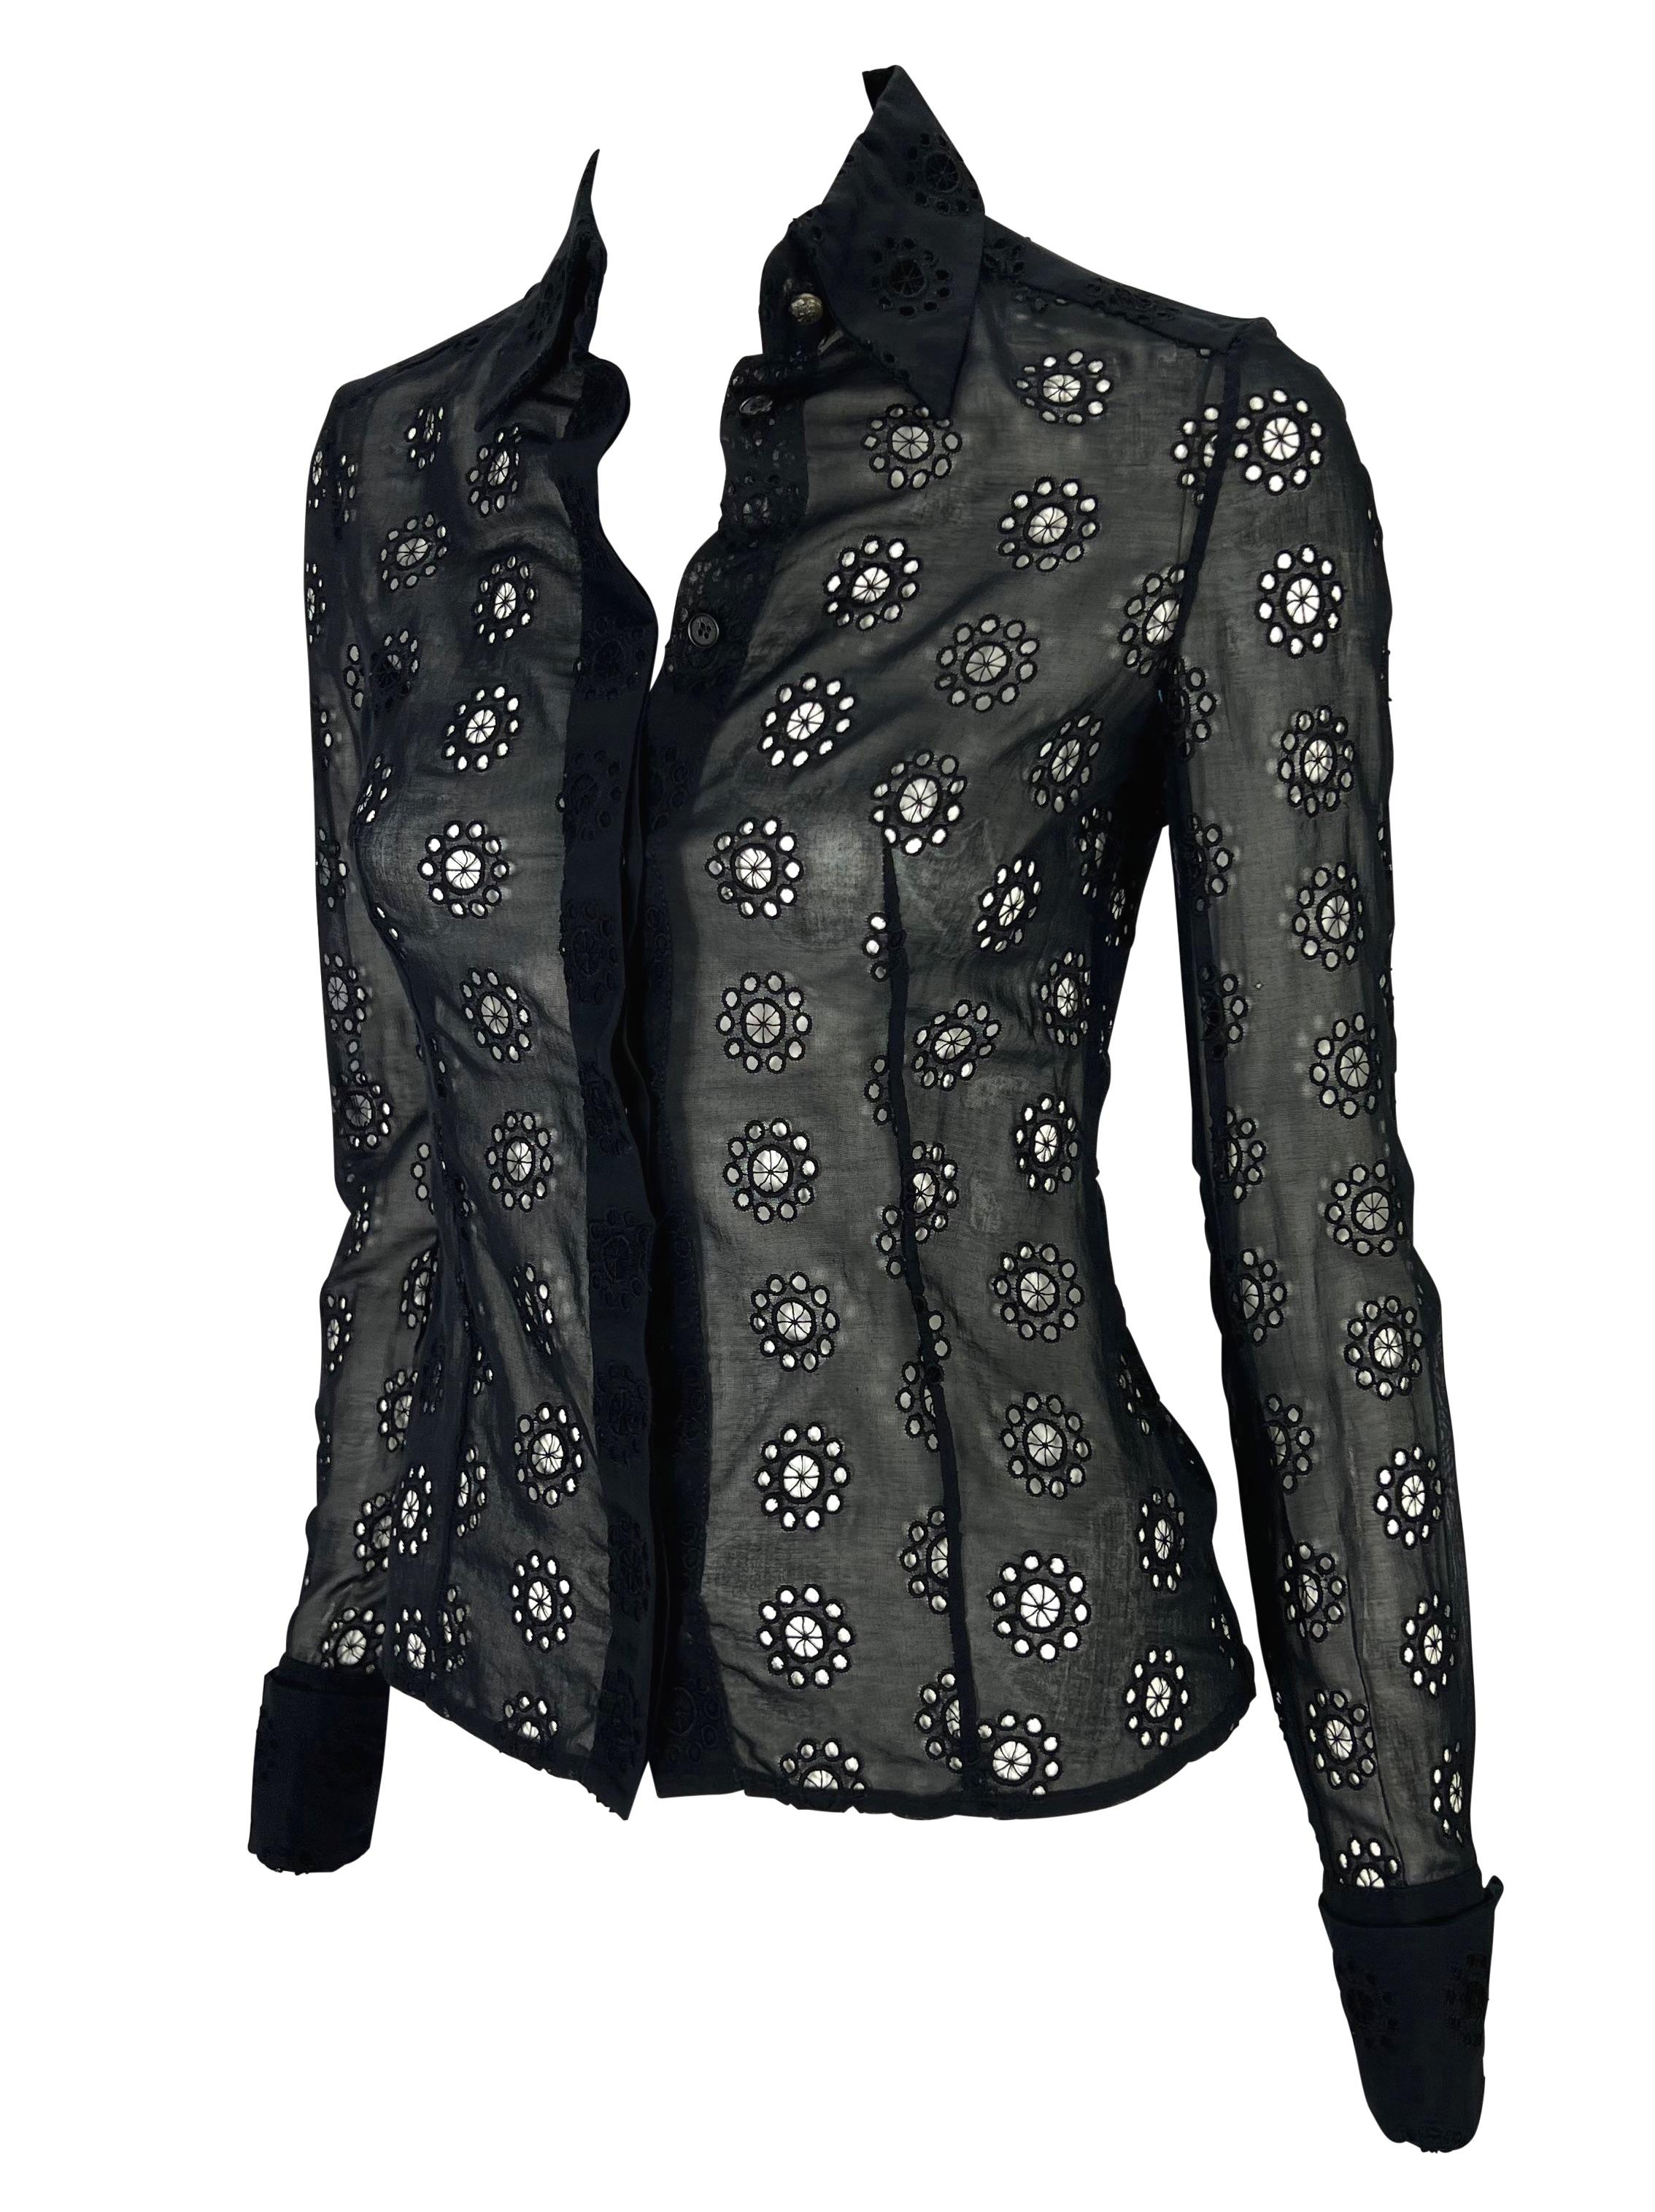 Presenting a black sheer eyelet Gianni Versace Couture top, designed by Donatella Versace. From the Spring/Summer 2002 collection, this fabulous fitted button-down top features eyelet cutouts, a collar, and french cuffs with Gianni Versace